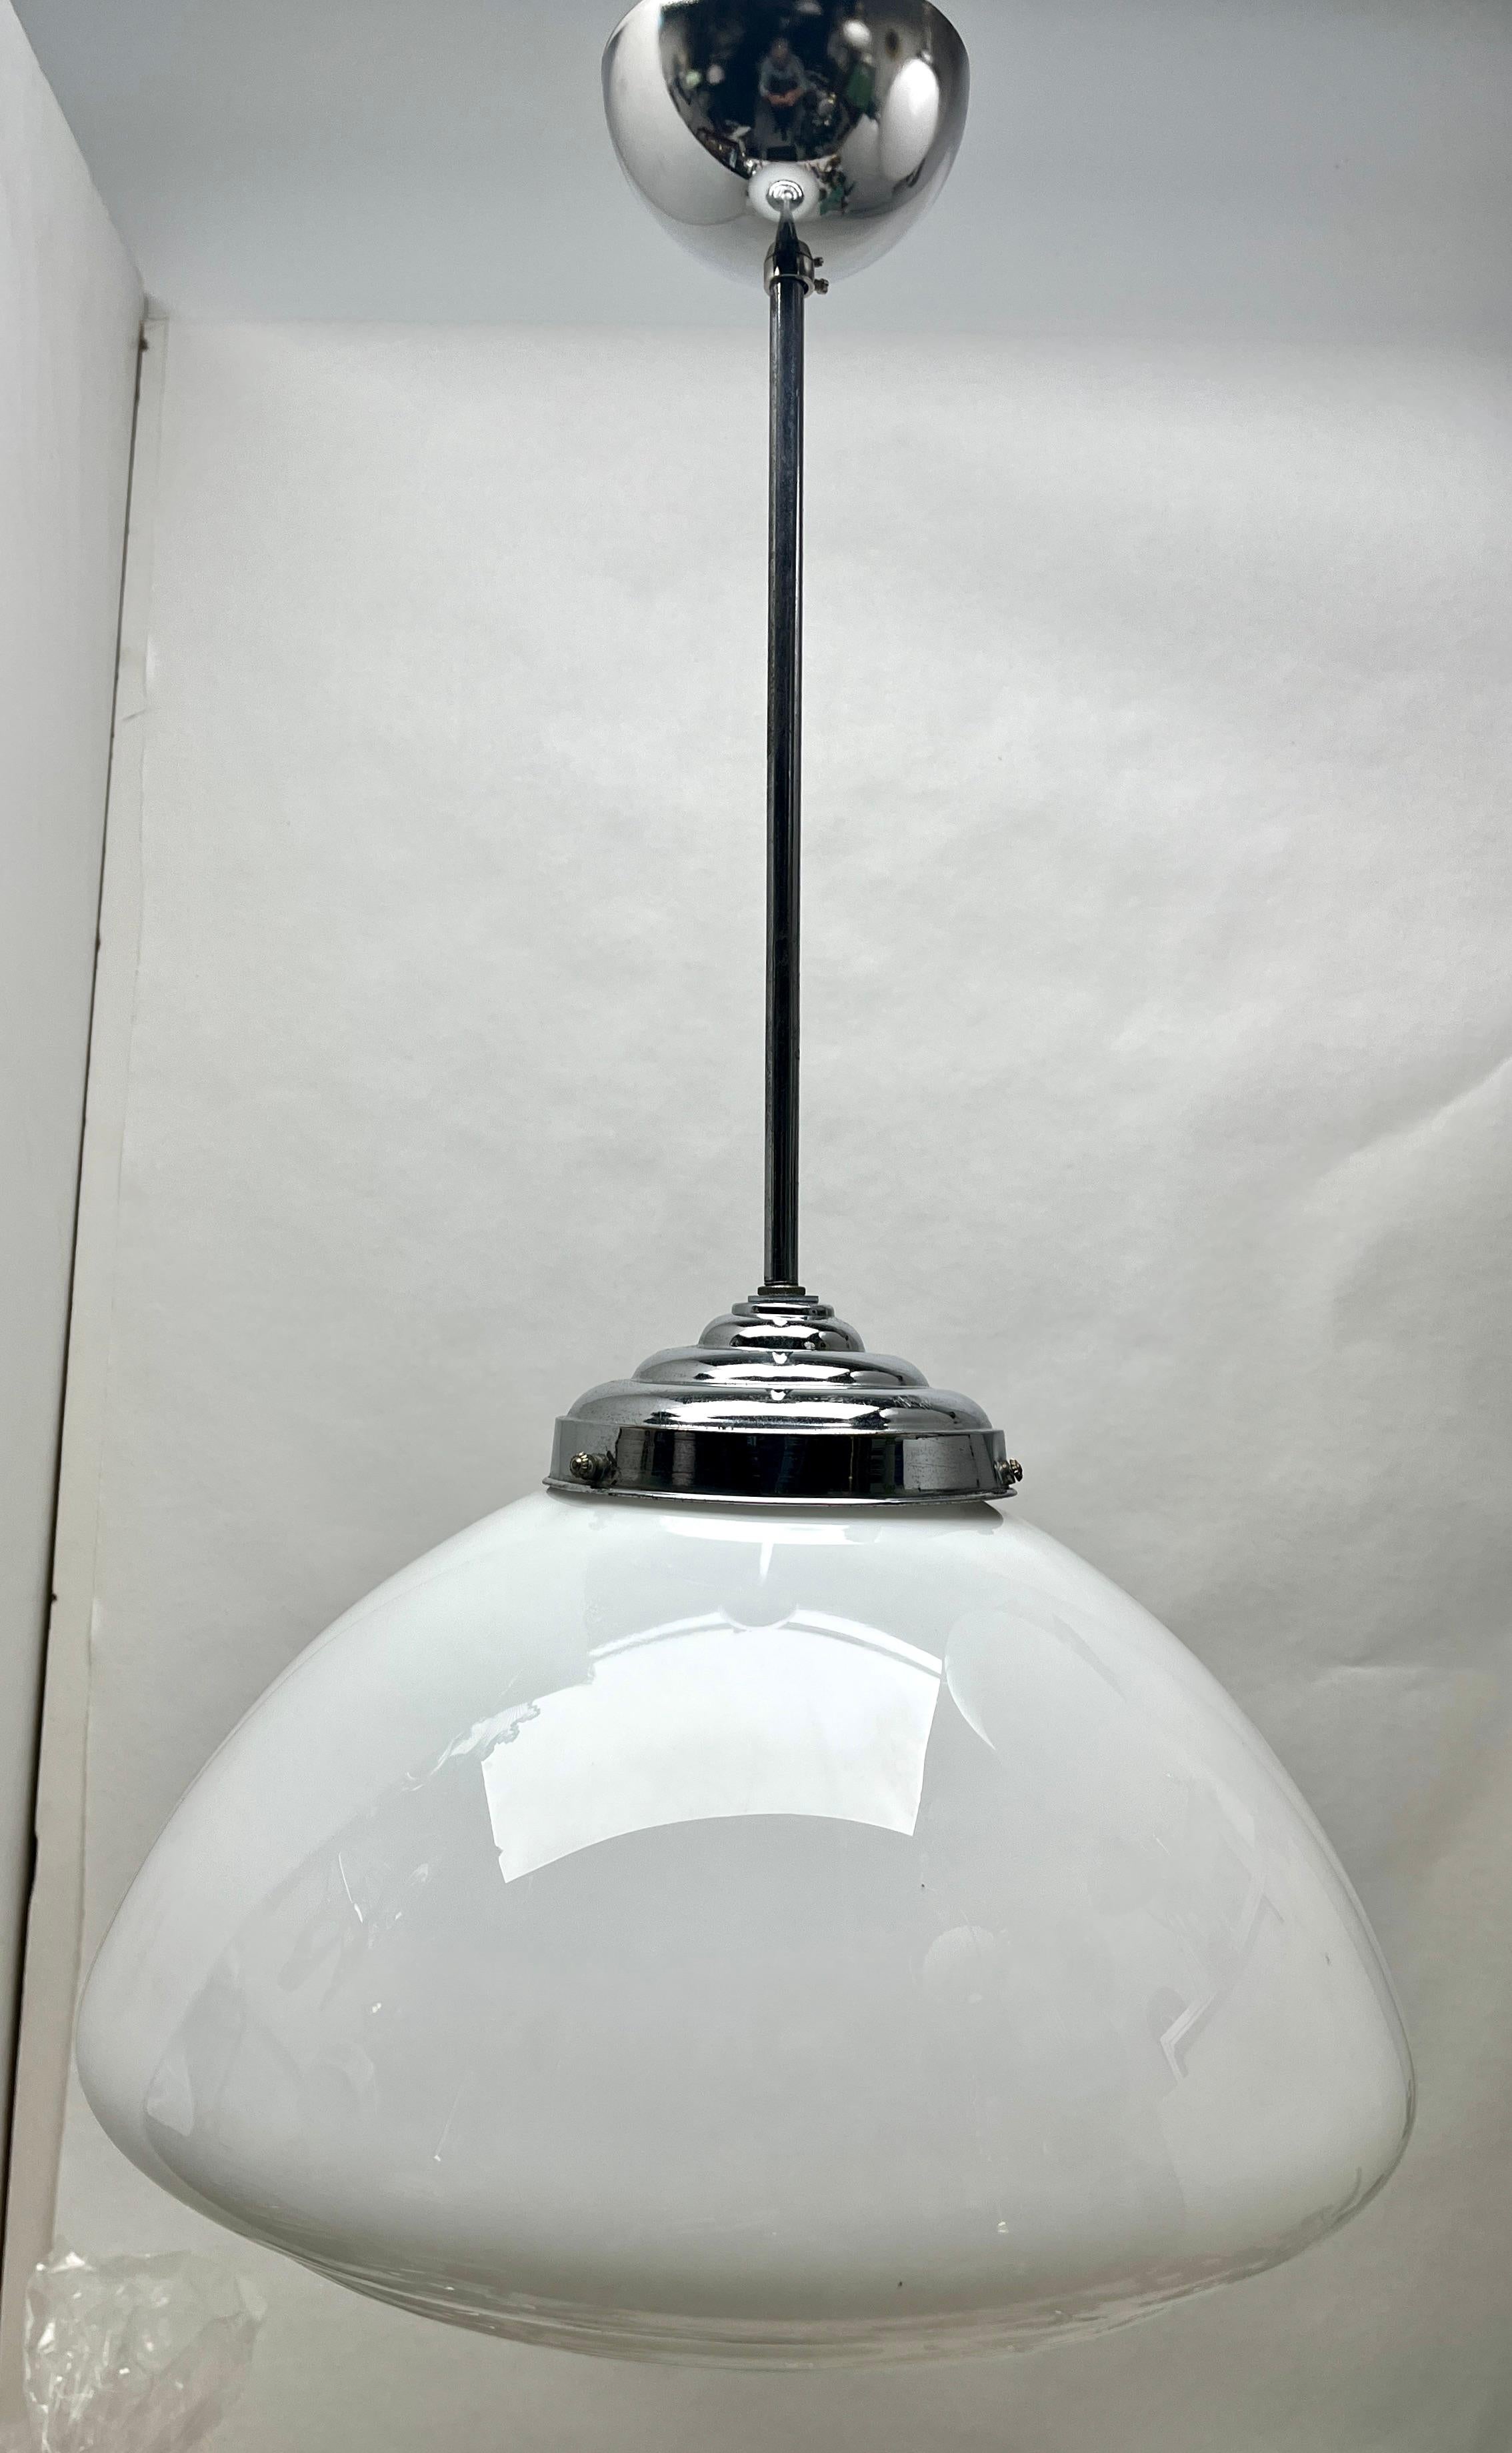 Phillips Pendant Stem Lamp with a Globular Opaline Shade, 1930s, Netherlands For Sale 1